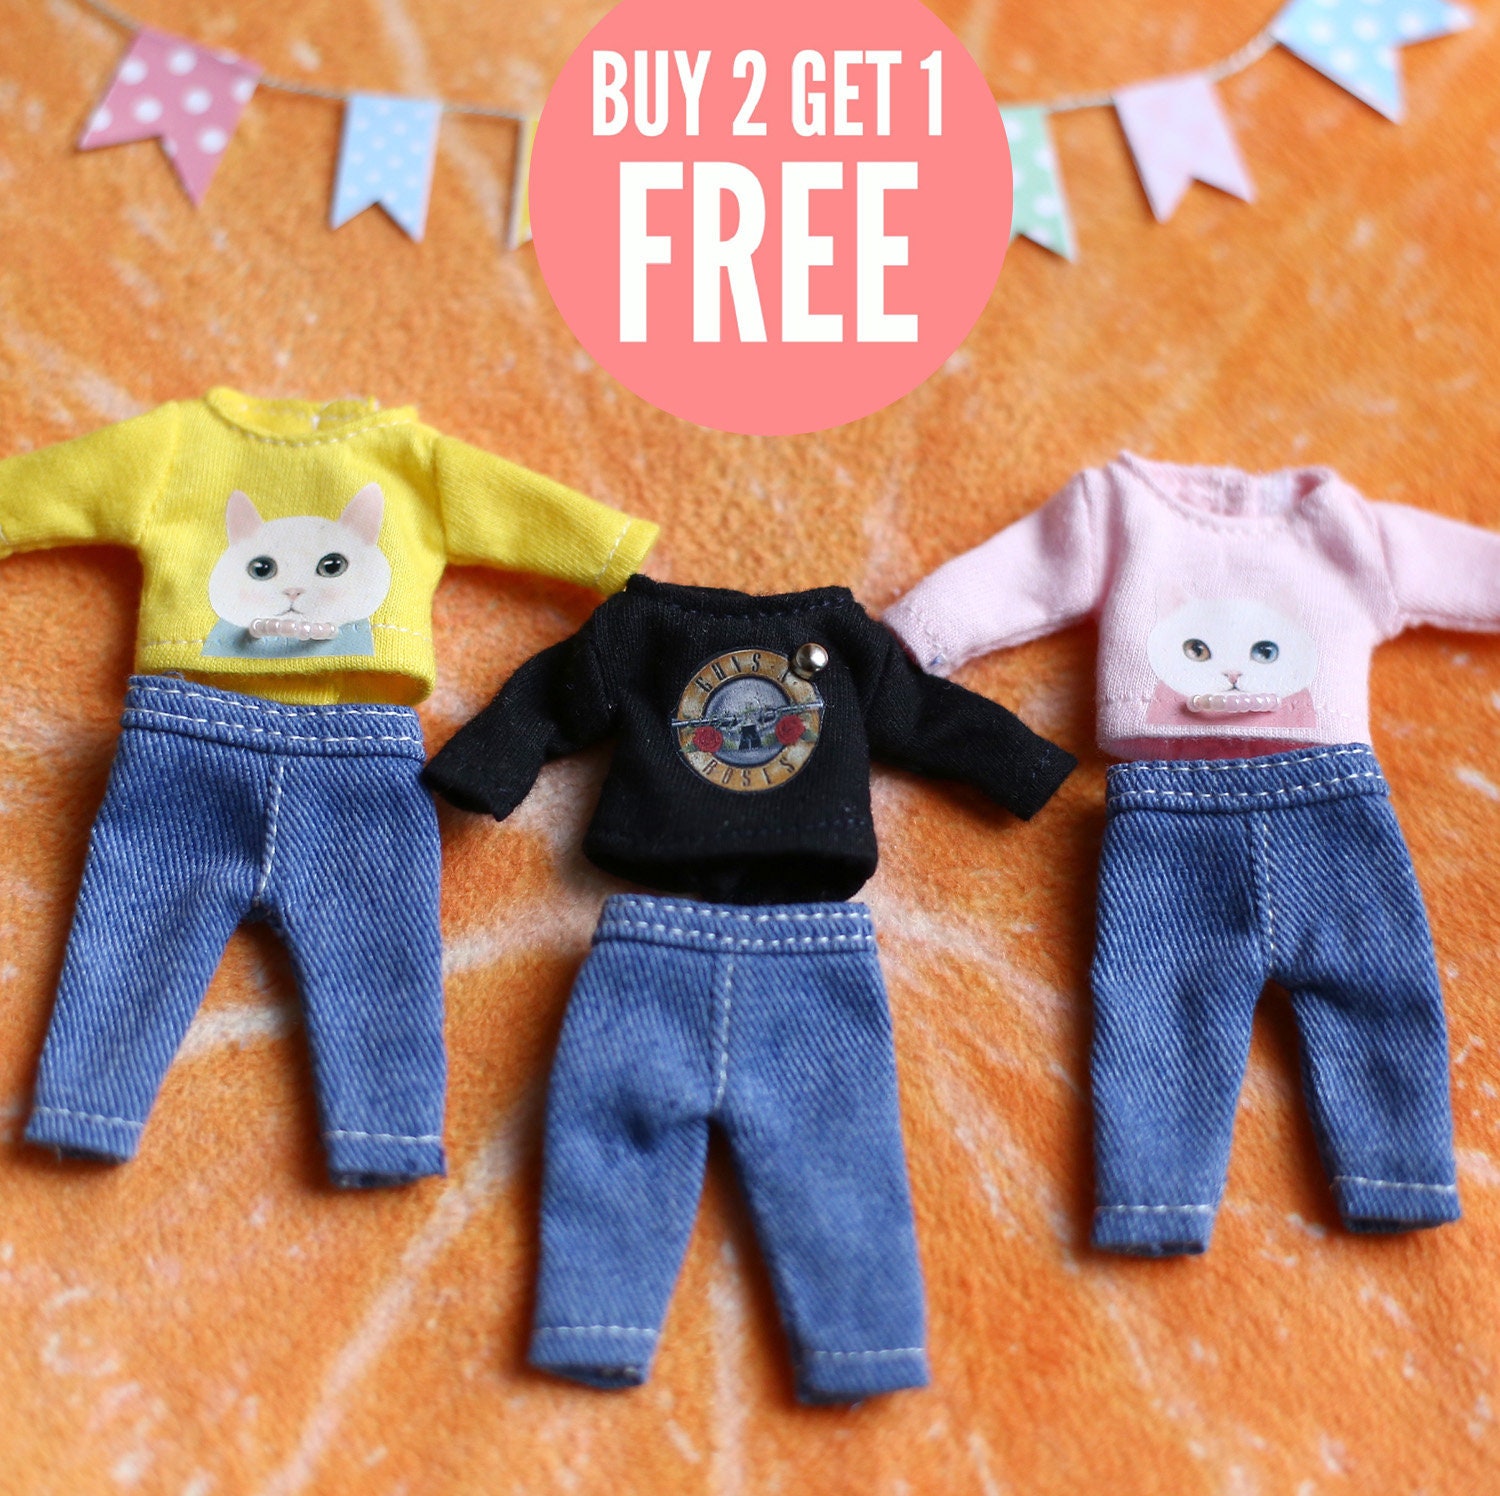 Buy 2 Get 1 Free / Doll clothes for Obitsu 11 cm. | Etsy